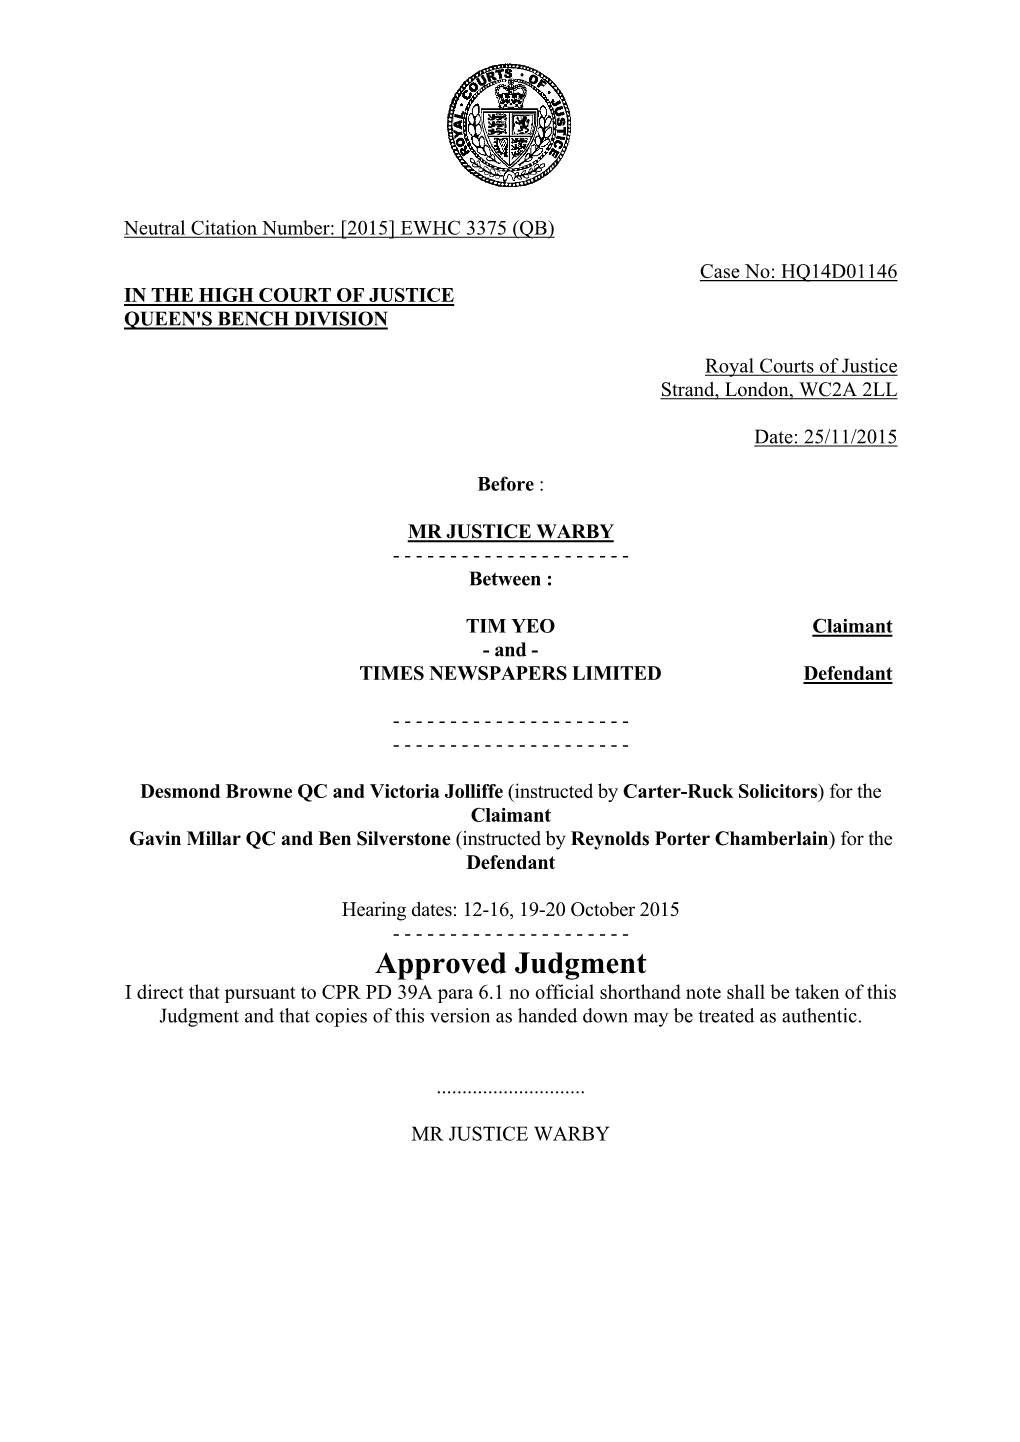 Yeo V Times Newspapers Approved Judgment